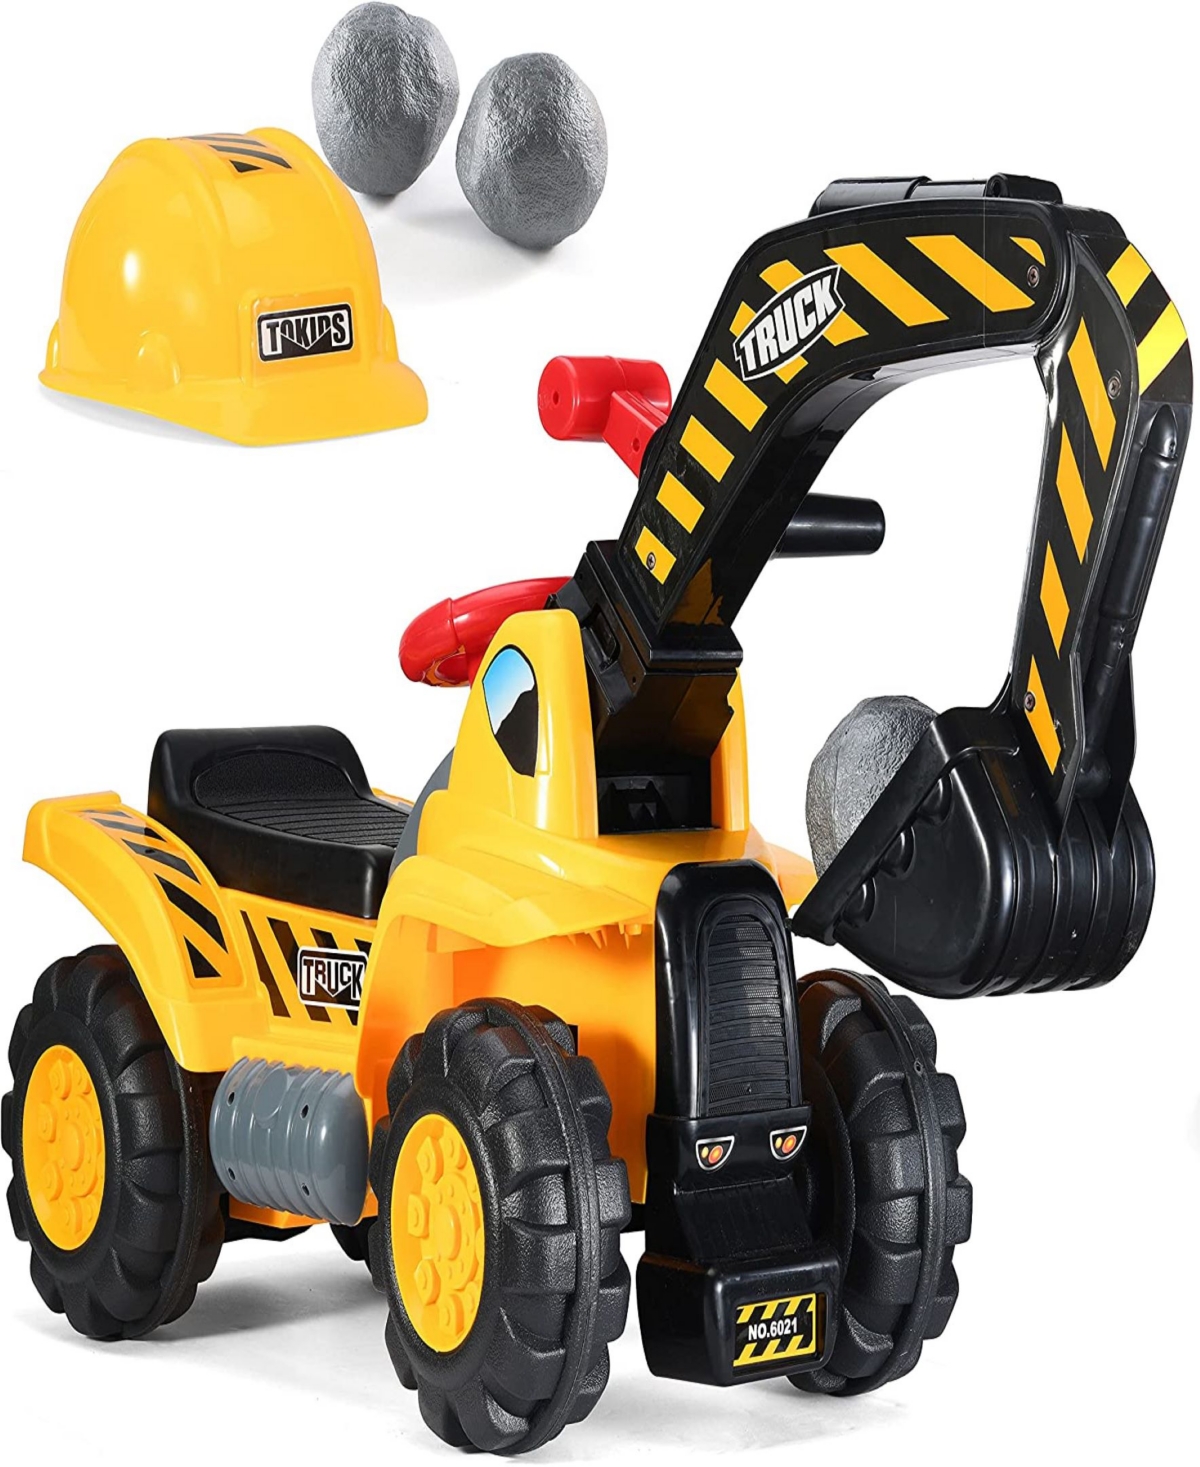 Play22 Babies' Toy Tractors For Kids Ride On Excavator In Multicolor